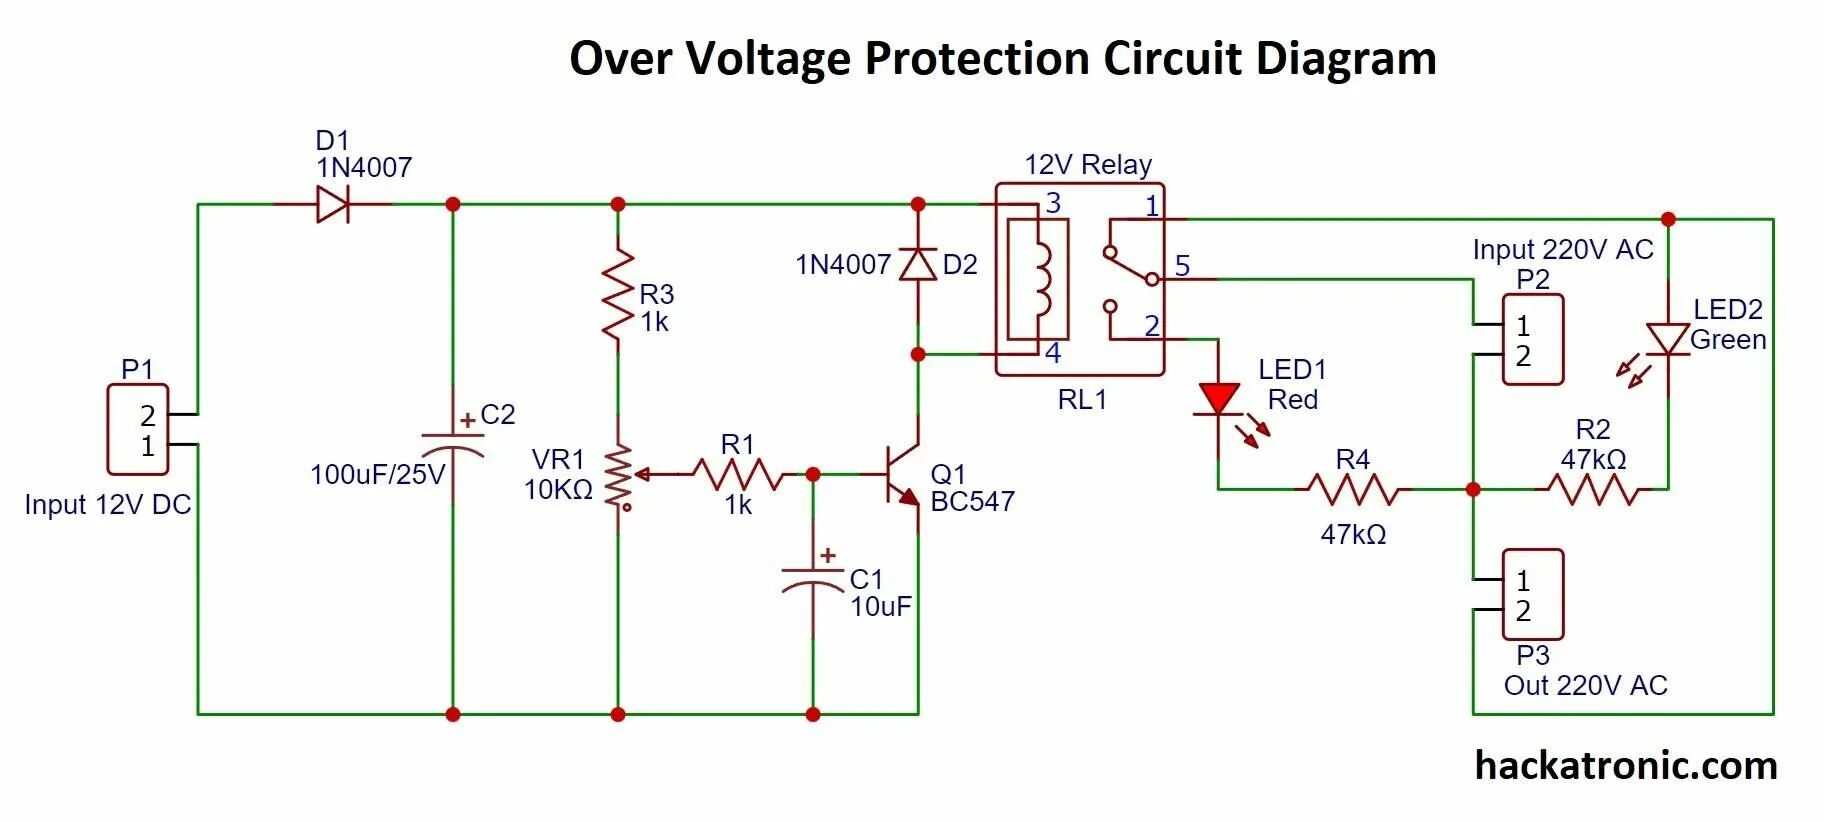 Over voltage. Overvoltage Protection circuit. Power input over Voltage Protection. Overvoltage Protection Controller with Reverse polarity Protection. Under Voltage relay для генератора судового.